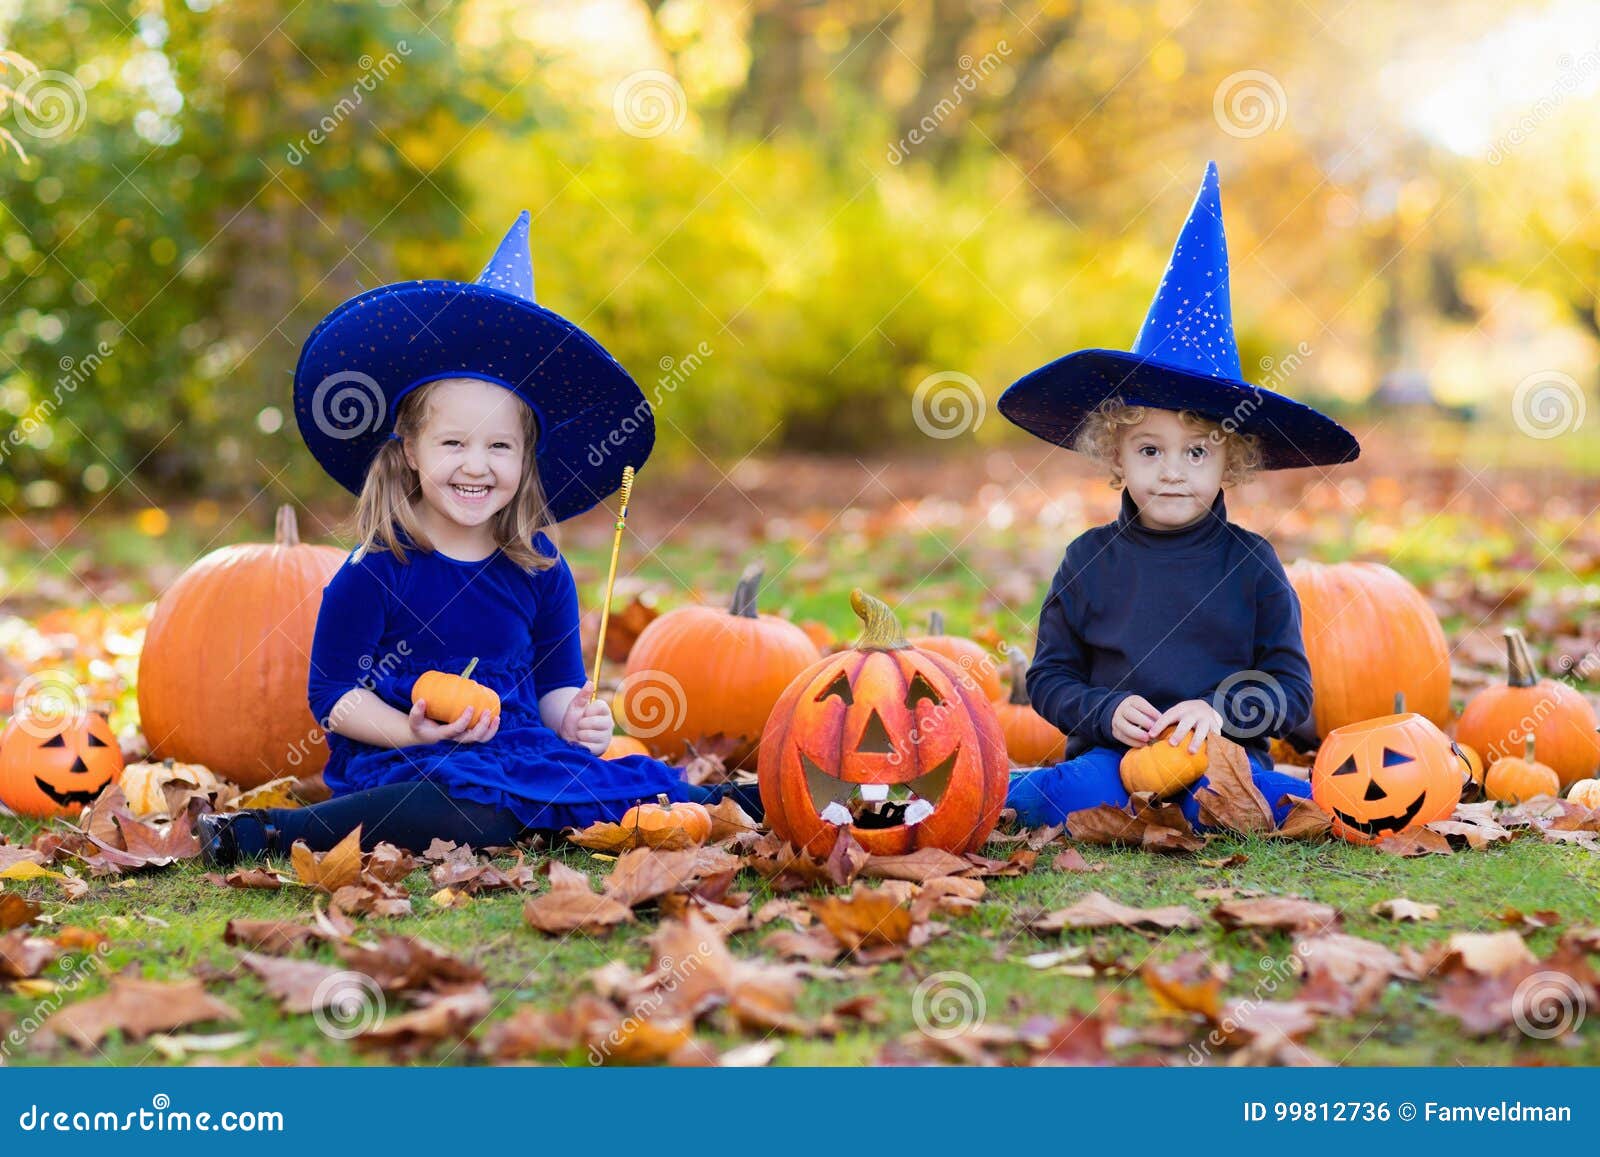 Kids with Pumpkins in Halloween Costumes Stock Photo - Image of black ...